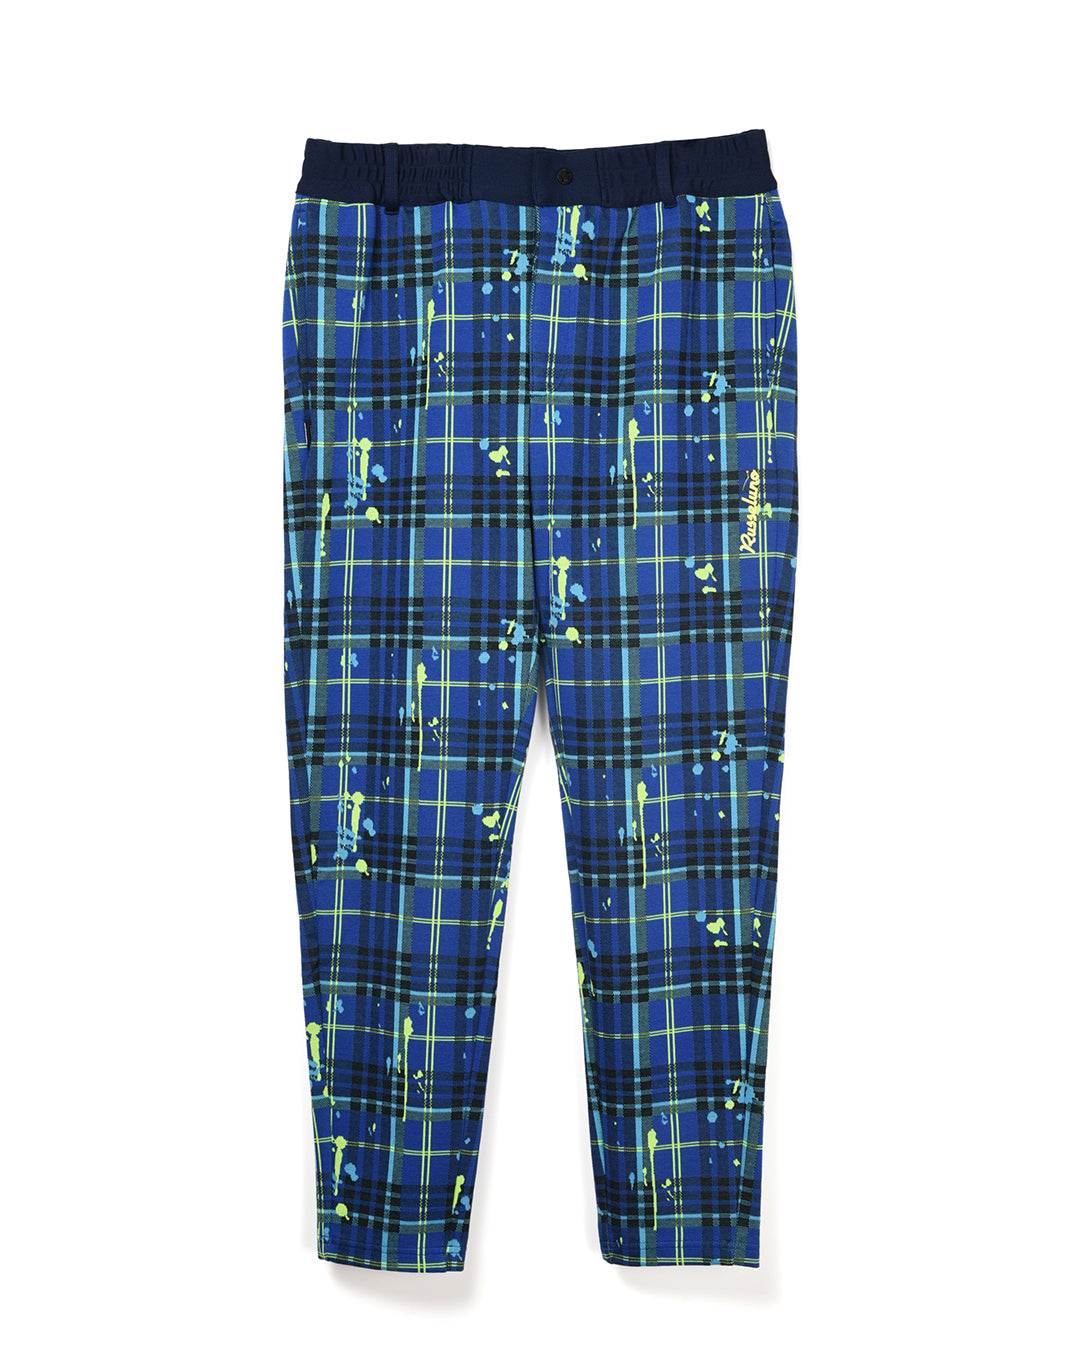 NEON CHECK PANTS – Russeluno Globel Official